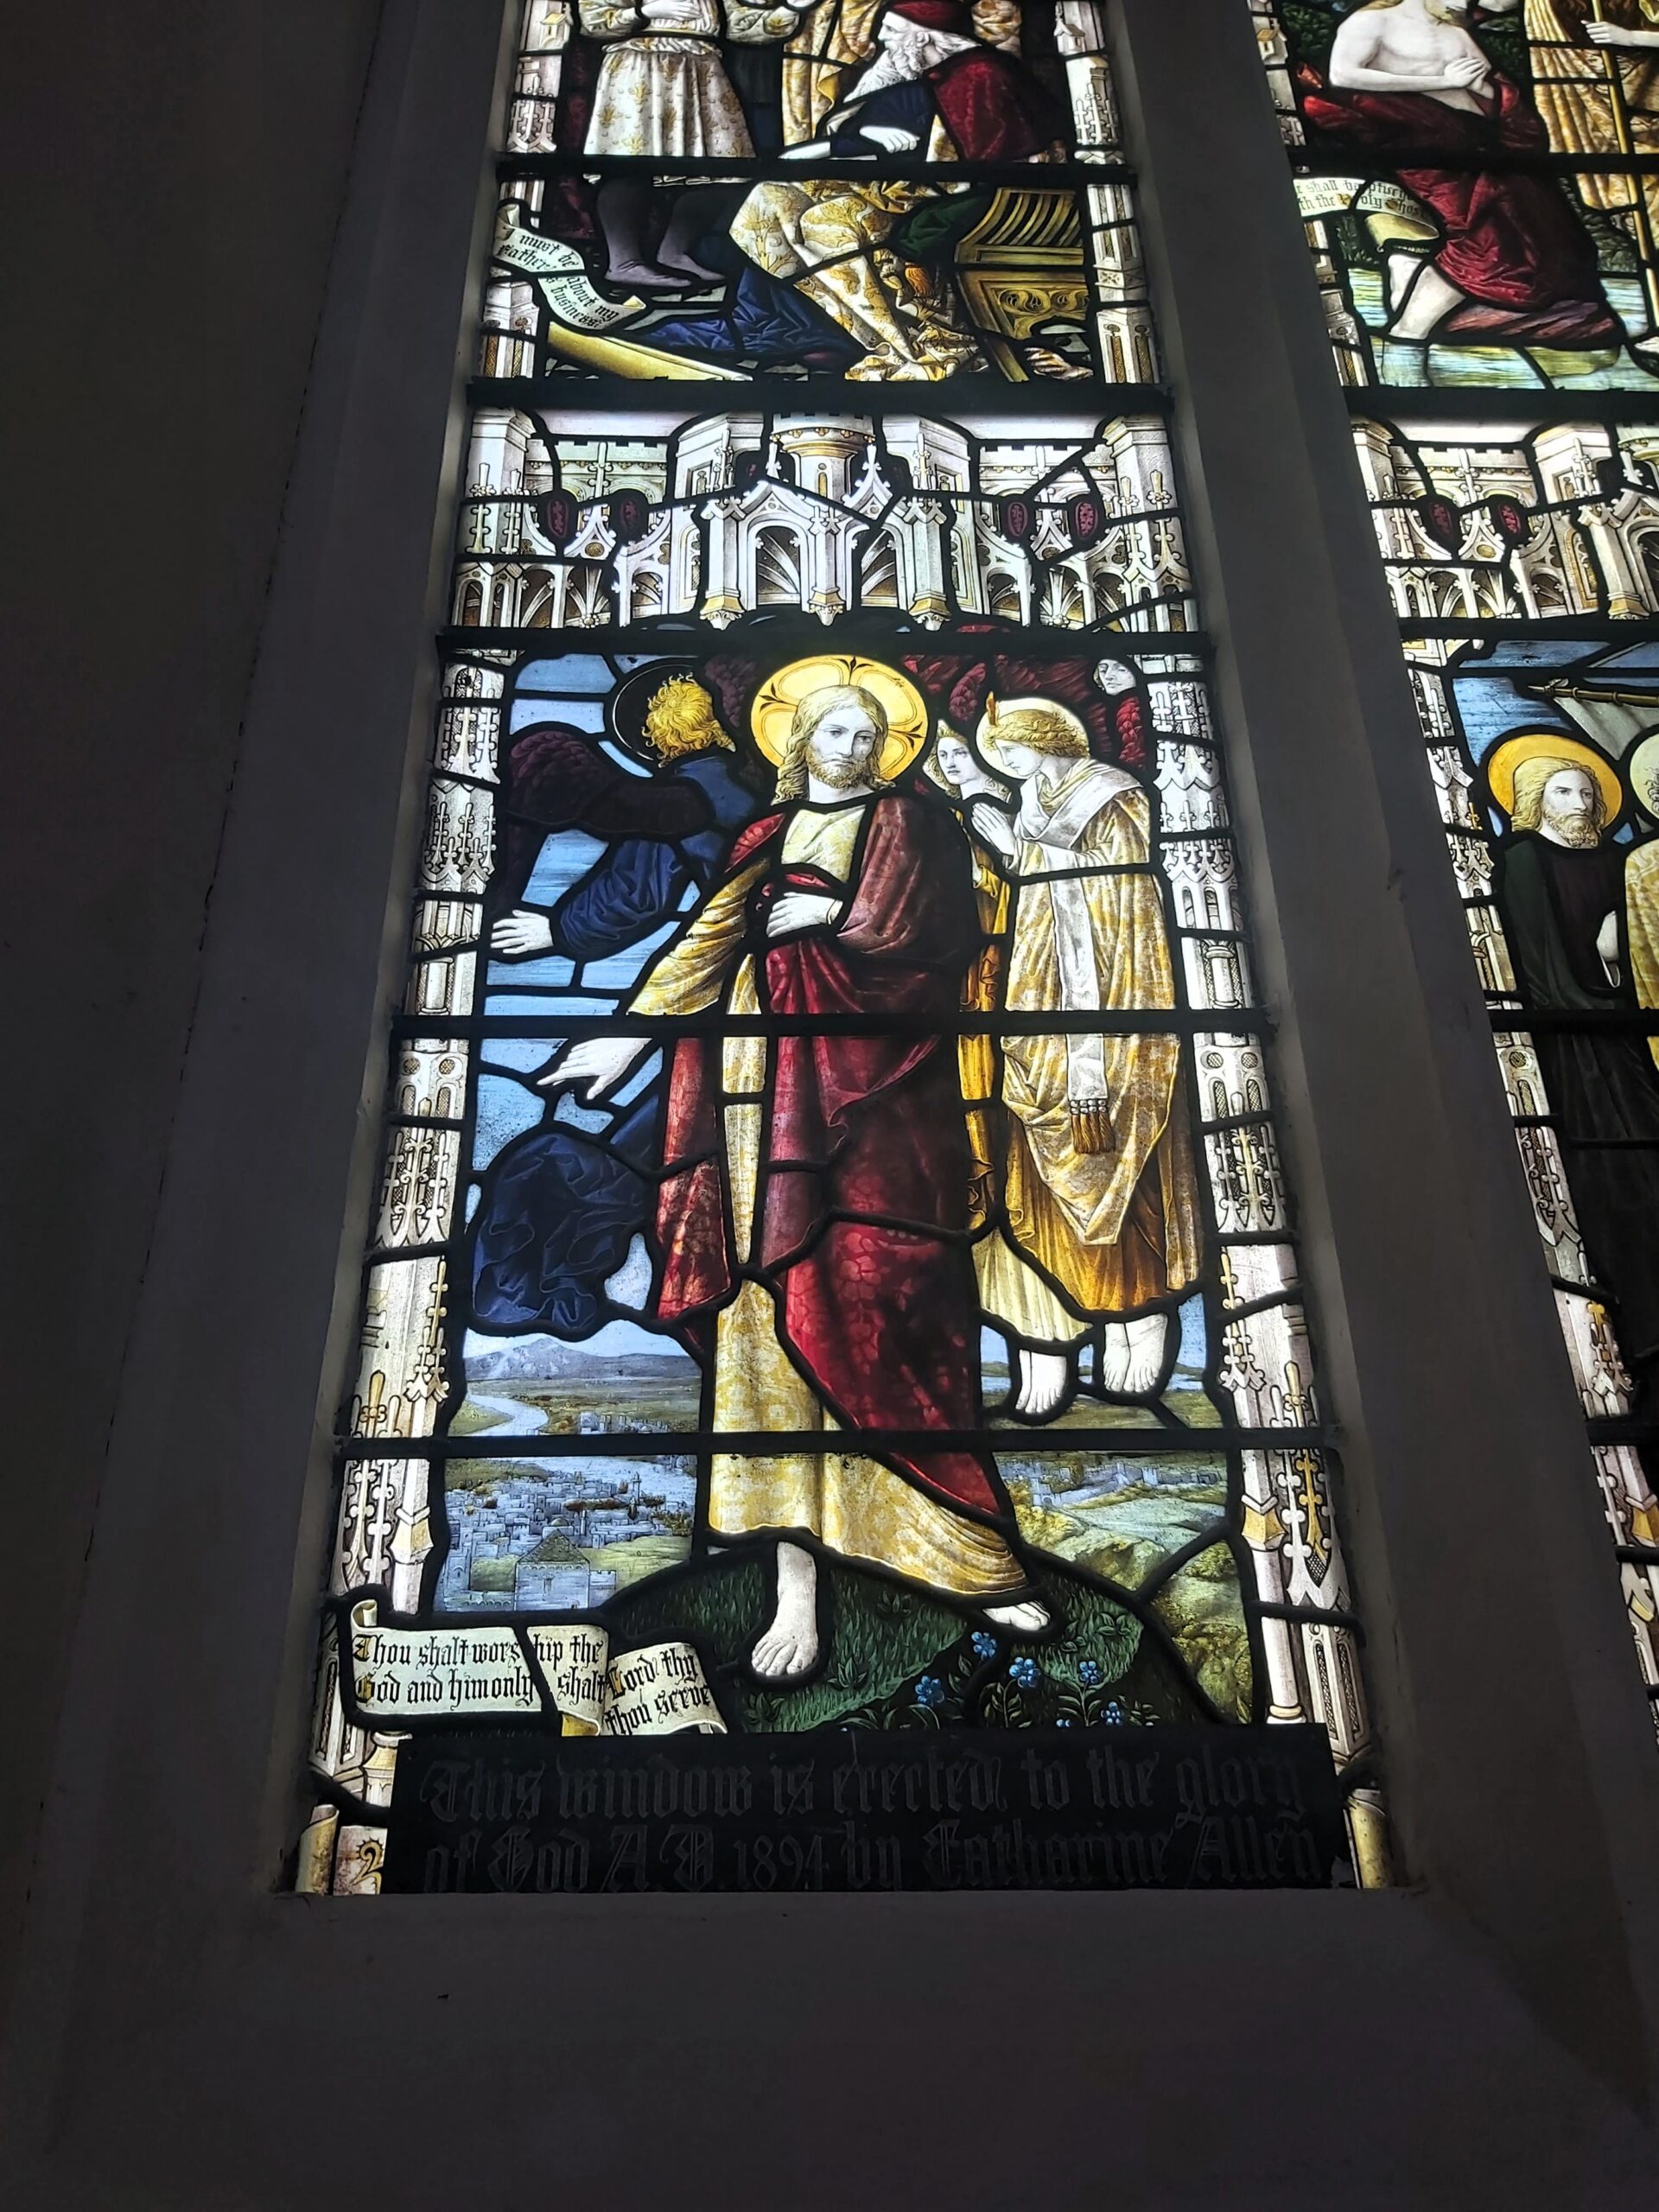 A close up of a stained glass window depicting Jesus in St Mary's Church, Ware, England